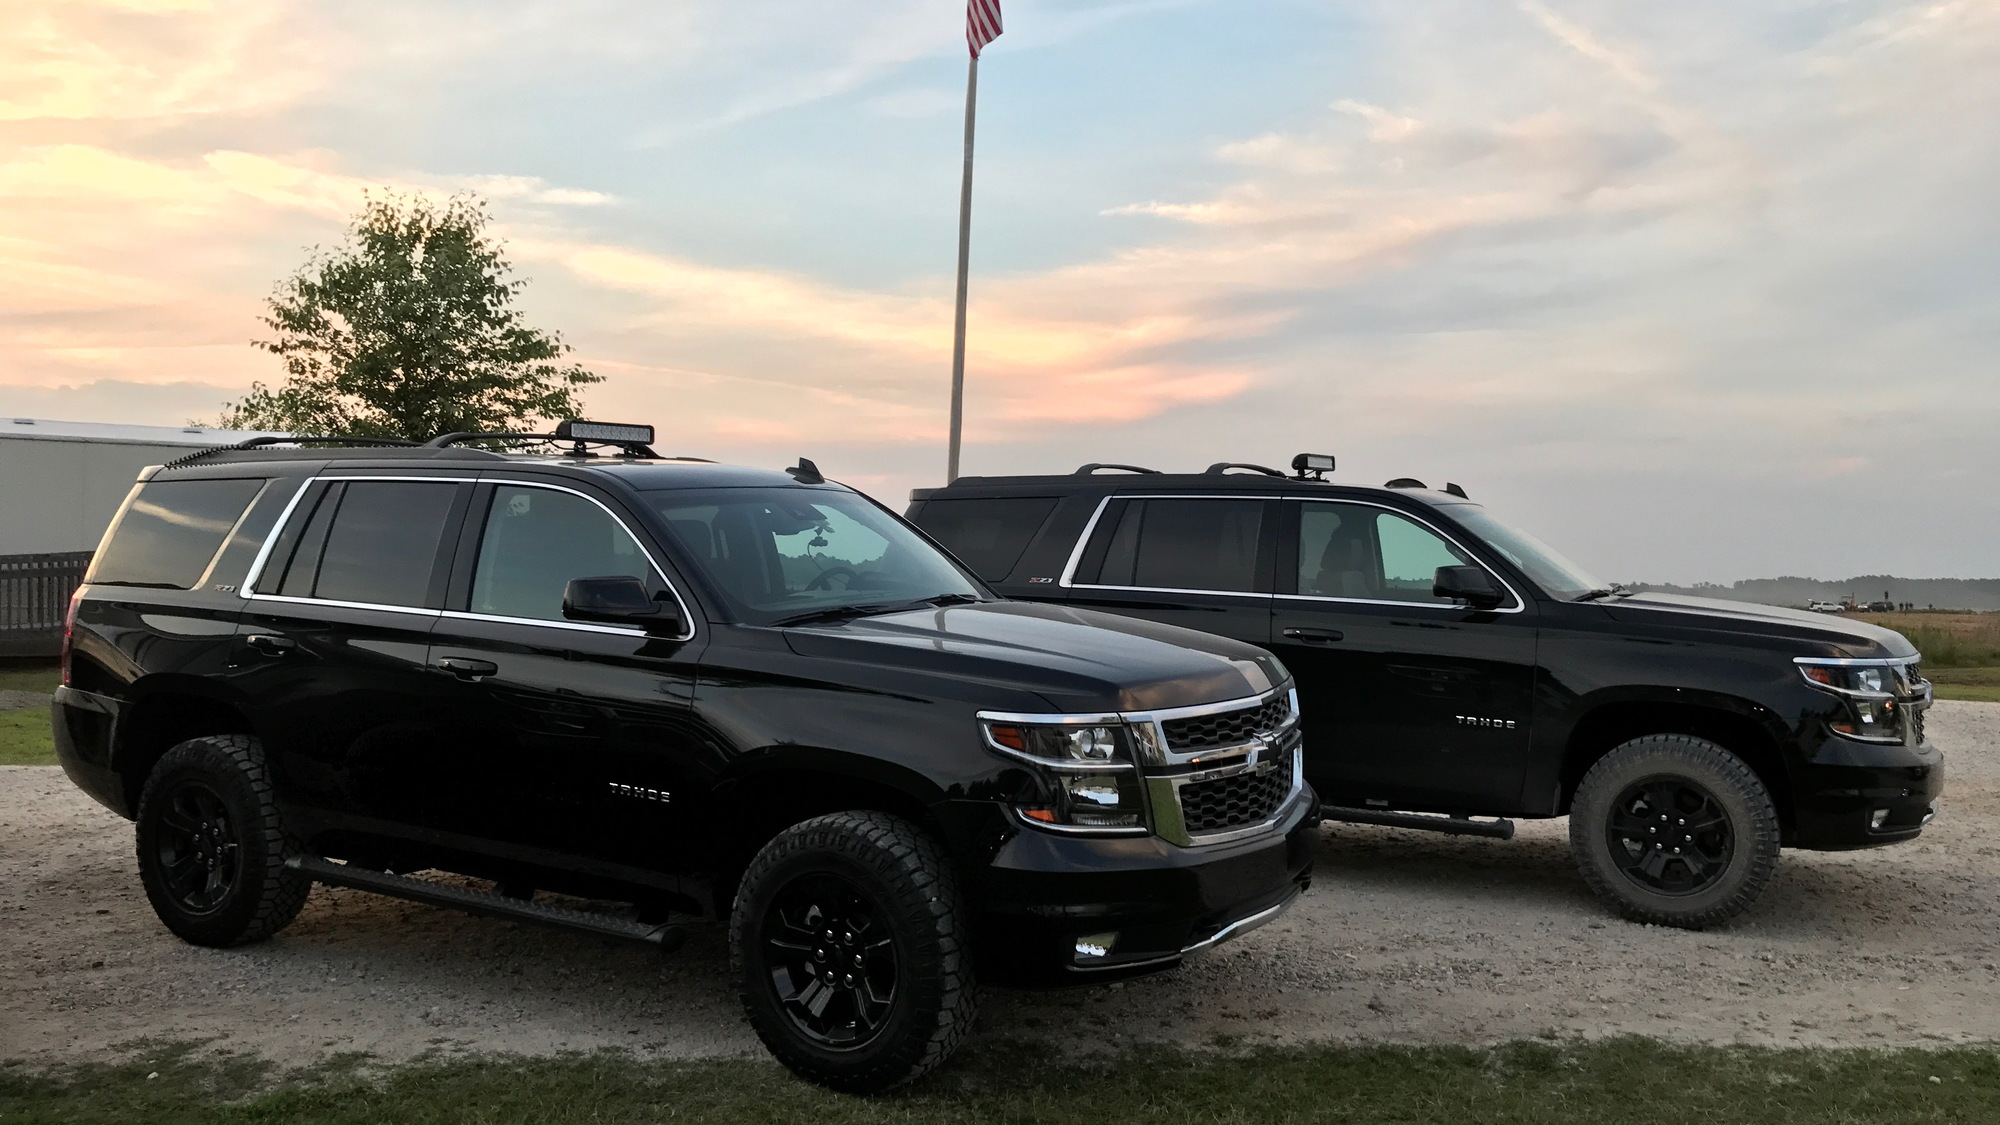 2017 Chevrolet Tahoe and Suburban Midnight Editions at The Range Complex in Raleigh, North Carolina